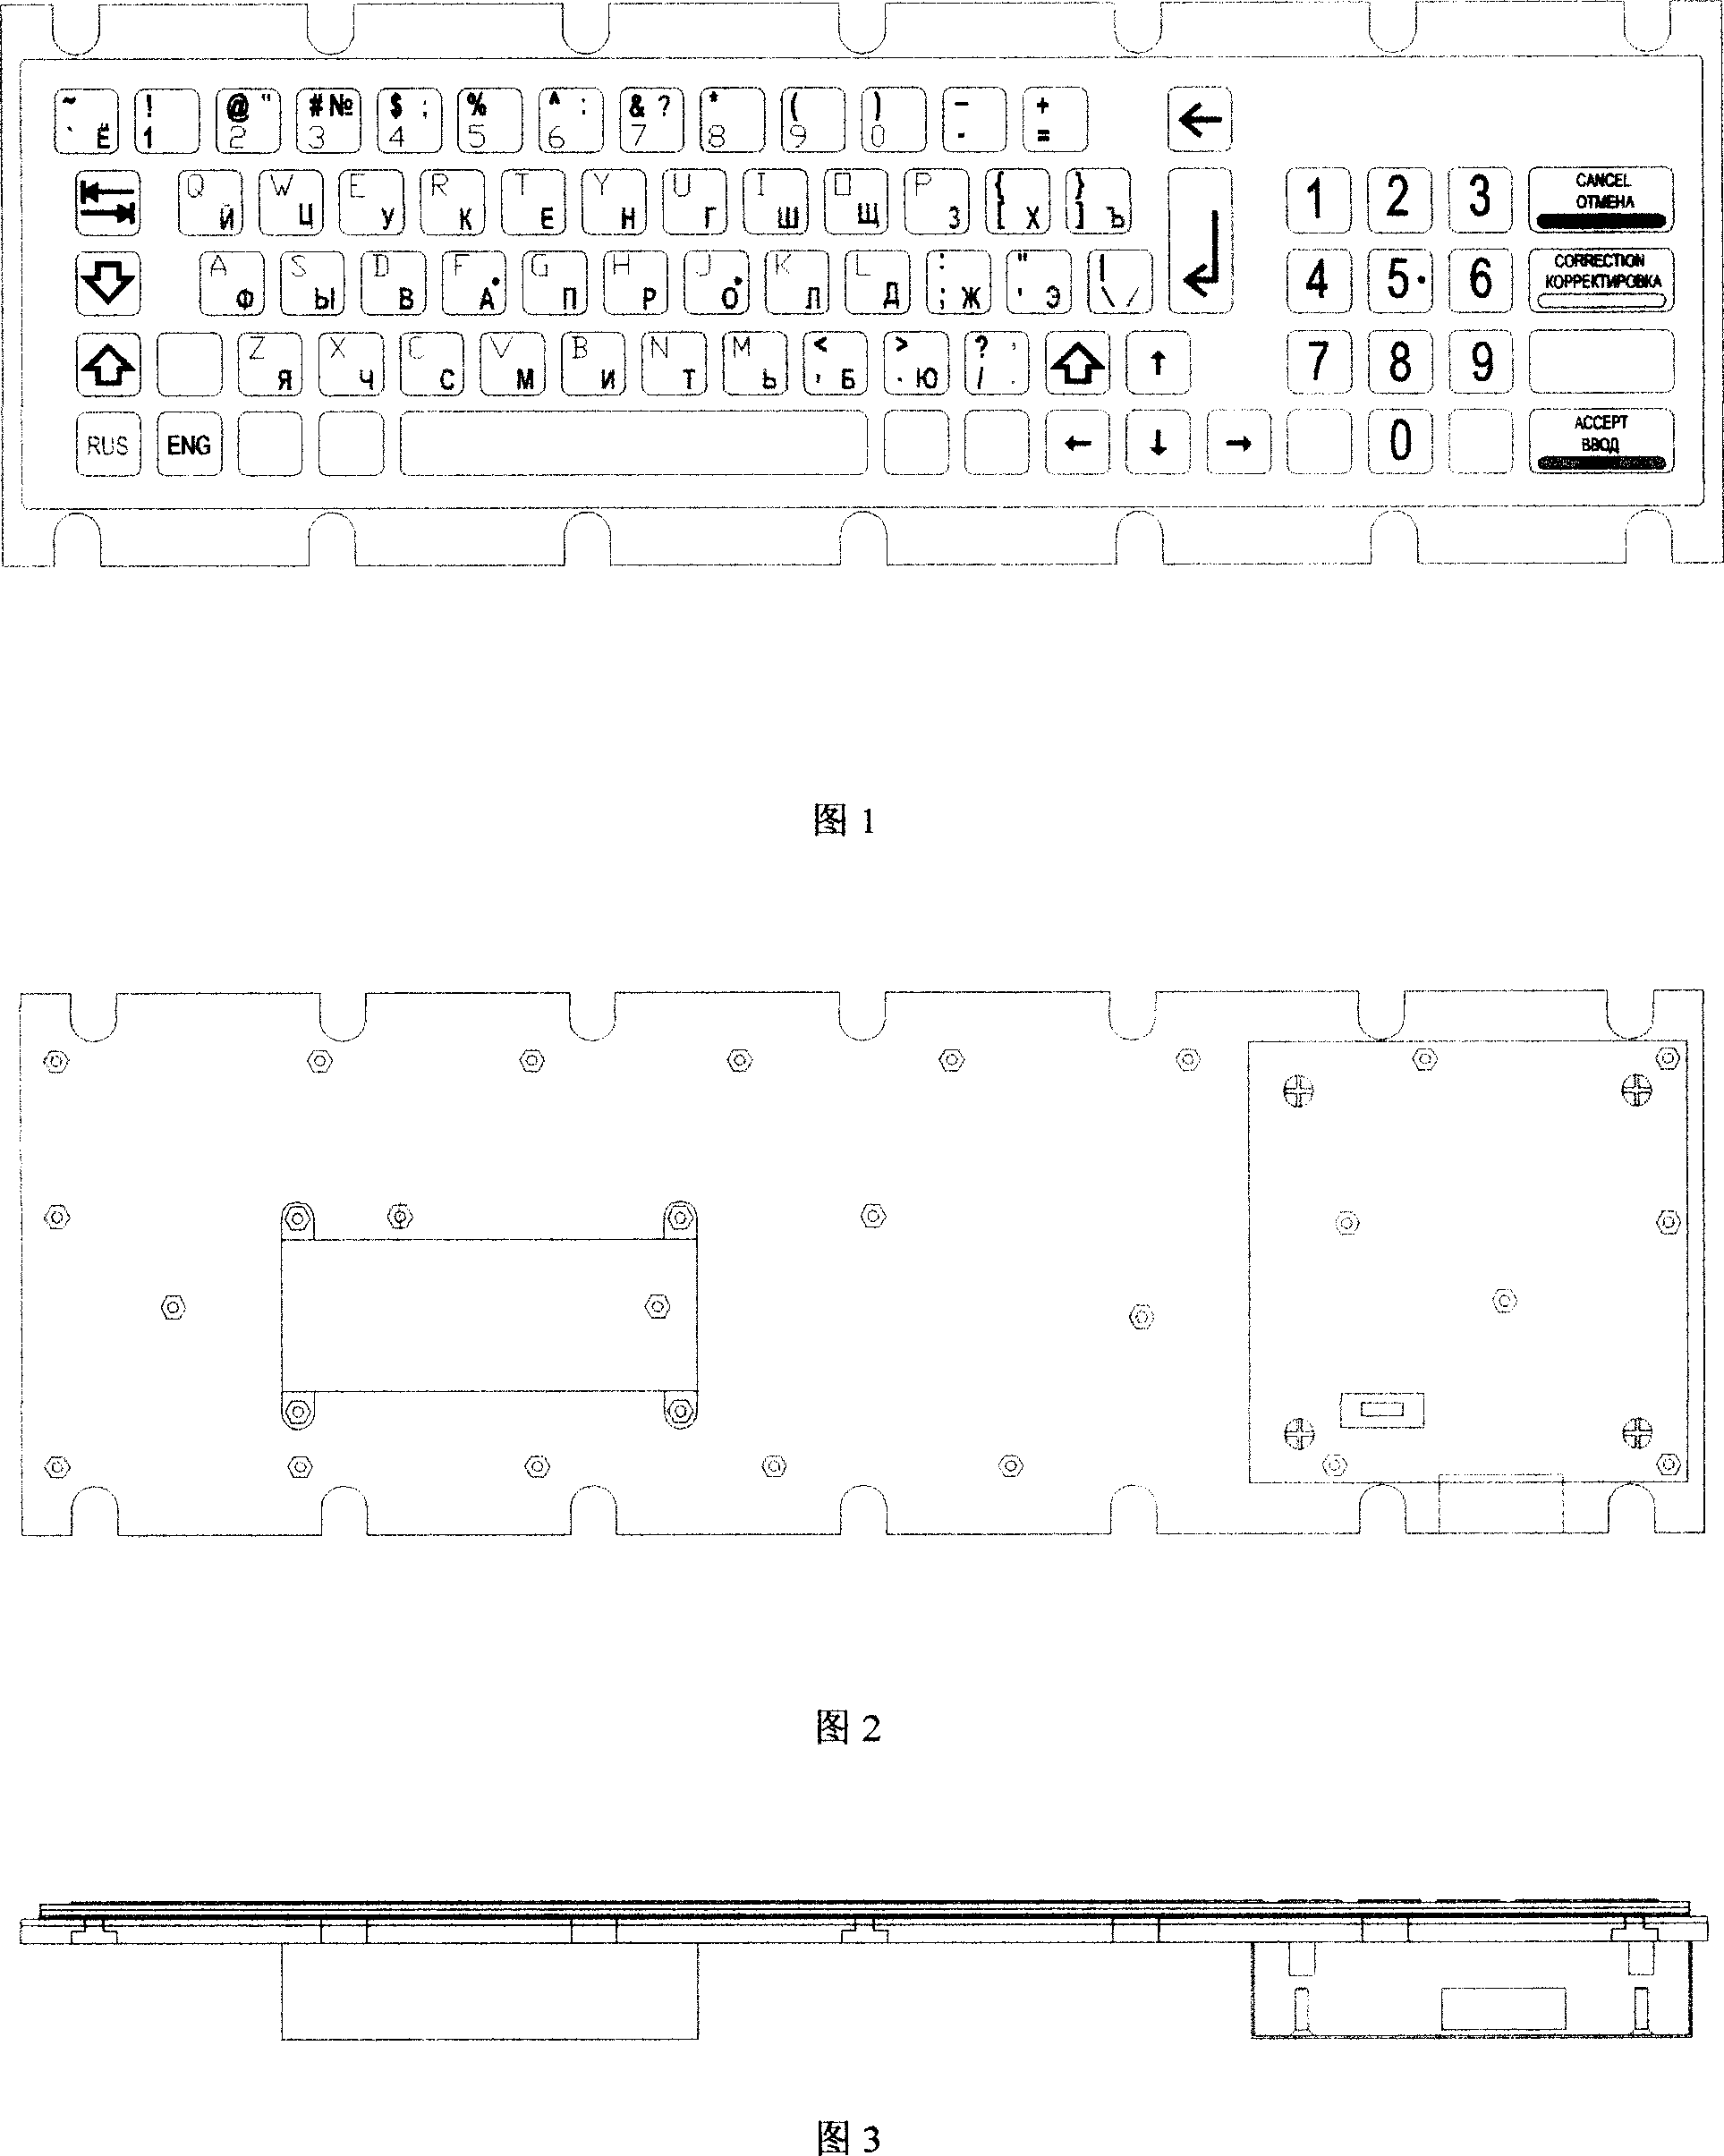 Safety connecting method between circuit boards on information safety device